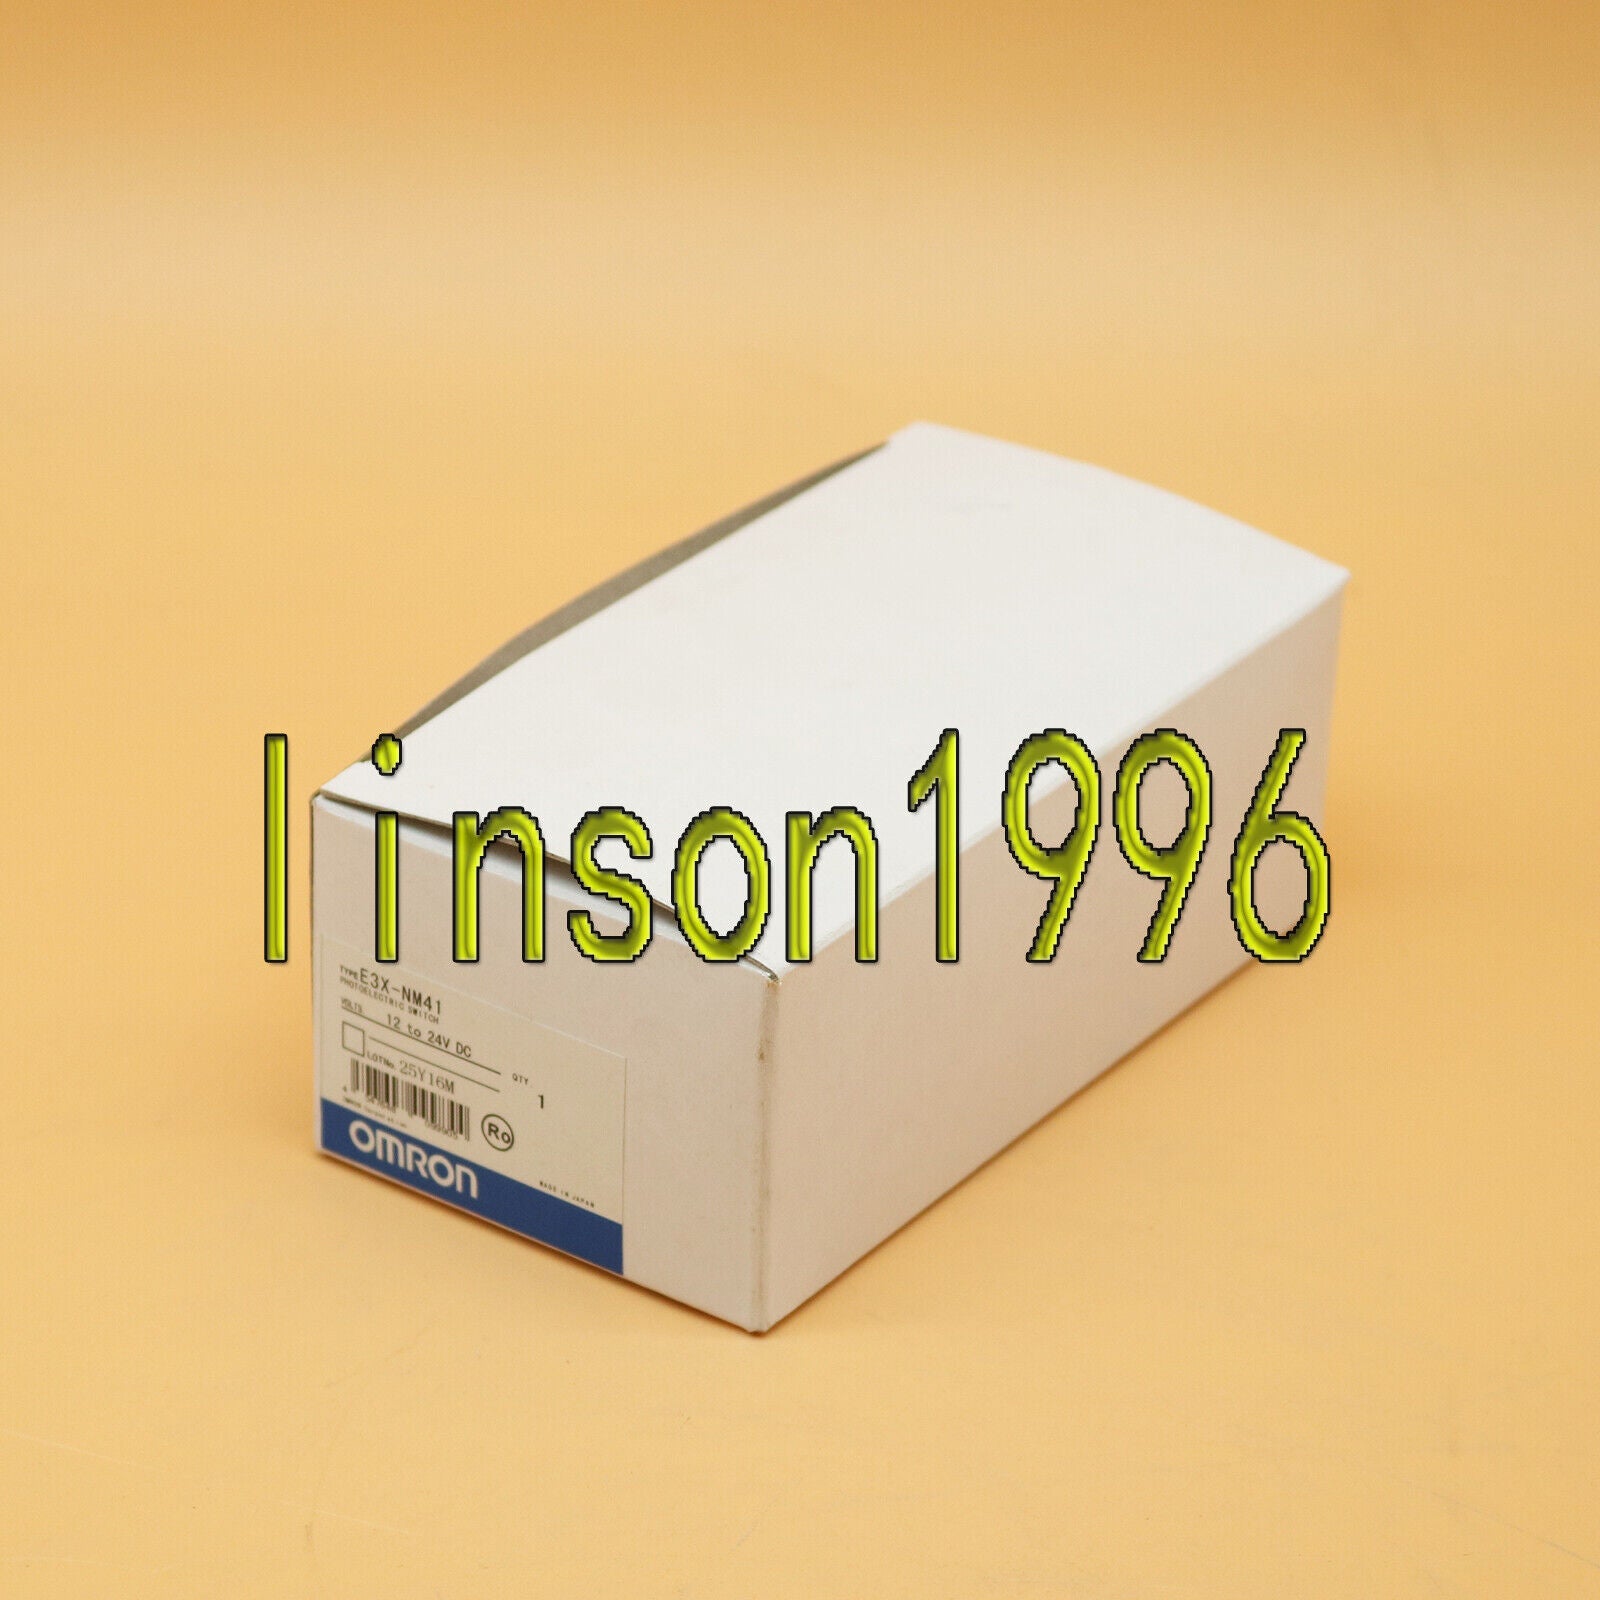 new ONE  Omron Amplifier Photoelectric Sensor E3X-NM41